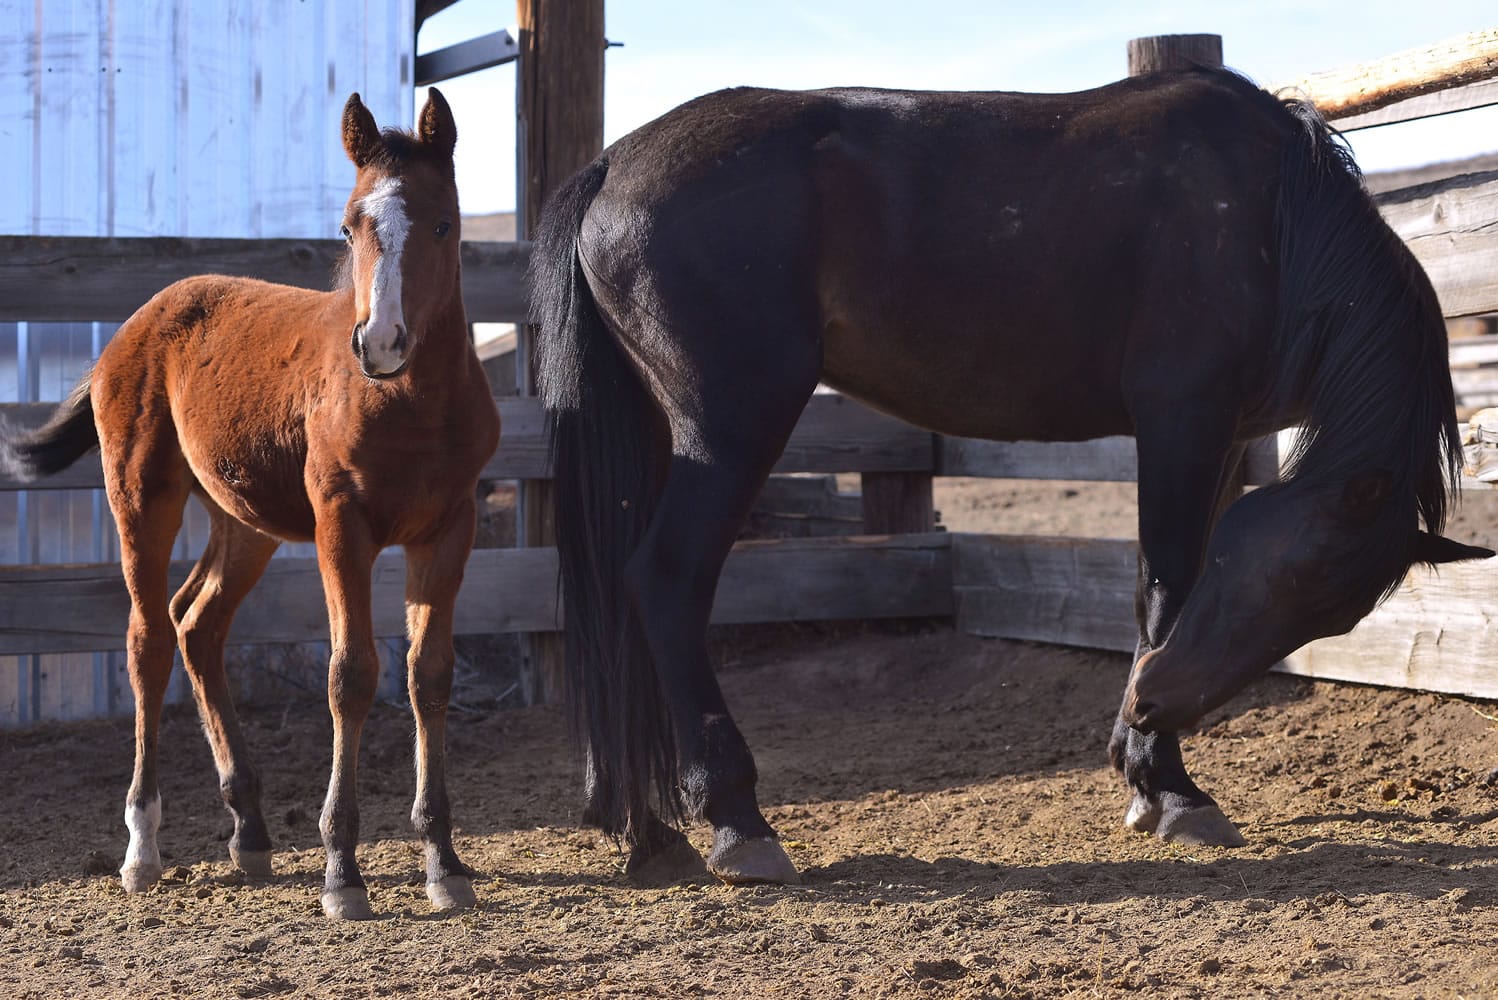 An injured wild mare recovers with her foal in September at Buck Brigotti Animal Rescue in Pendleton, Ore.